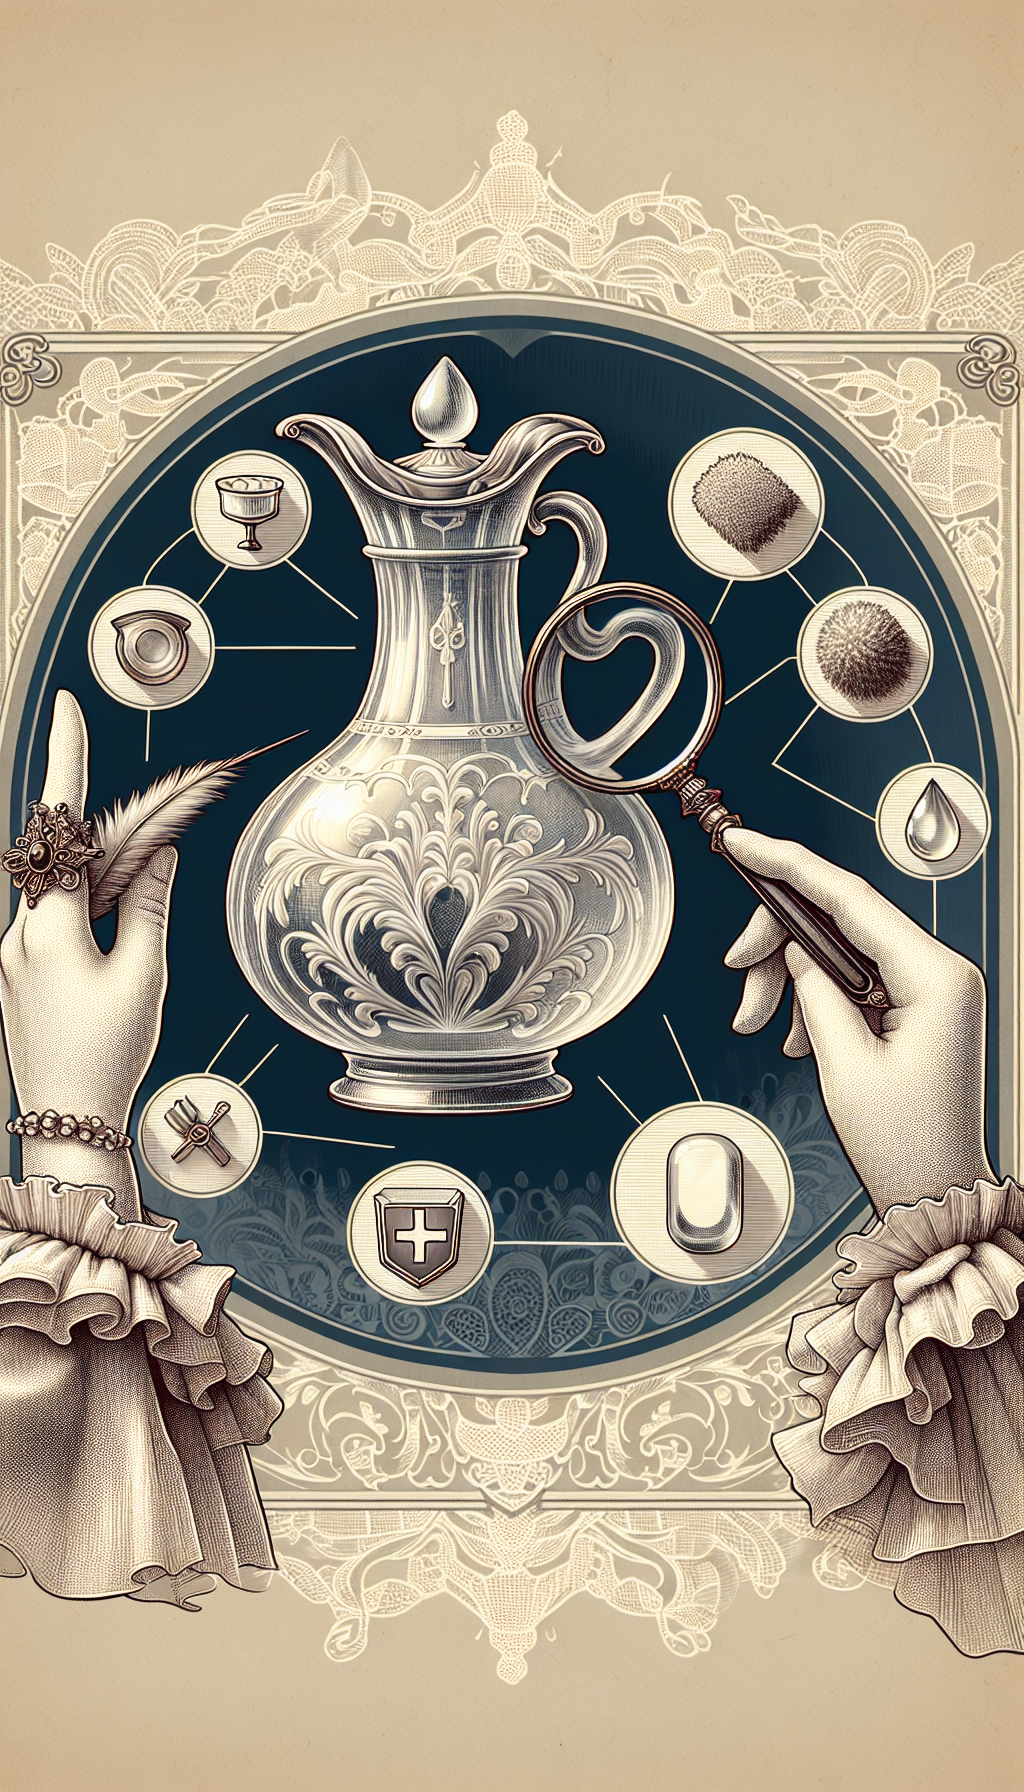 In the illustration, a Victorian-style hand gracefully holds a magnifying glass, inspecting a translucent, ornate antique glass pitcher that gleams amidst a backdrop of soft, vintage lace. Care icons encircle the pitcher—gentle sponge, feather duster, droplet, and UV shield—symbolizing maintenance tips, while intricate patterns on the pitcher's body subtly morph into identifying marks and dates, capturing both elegance and identification.